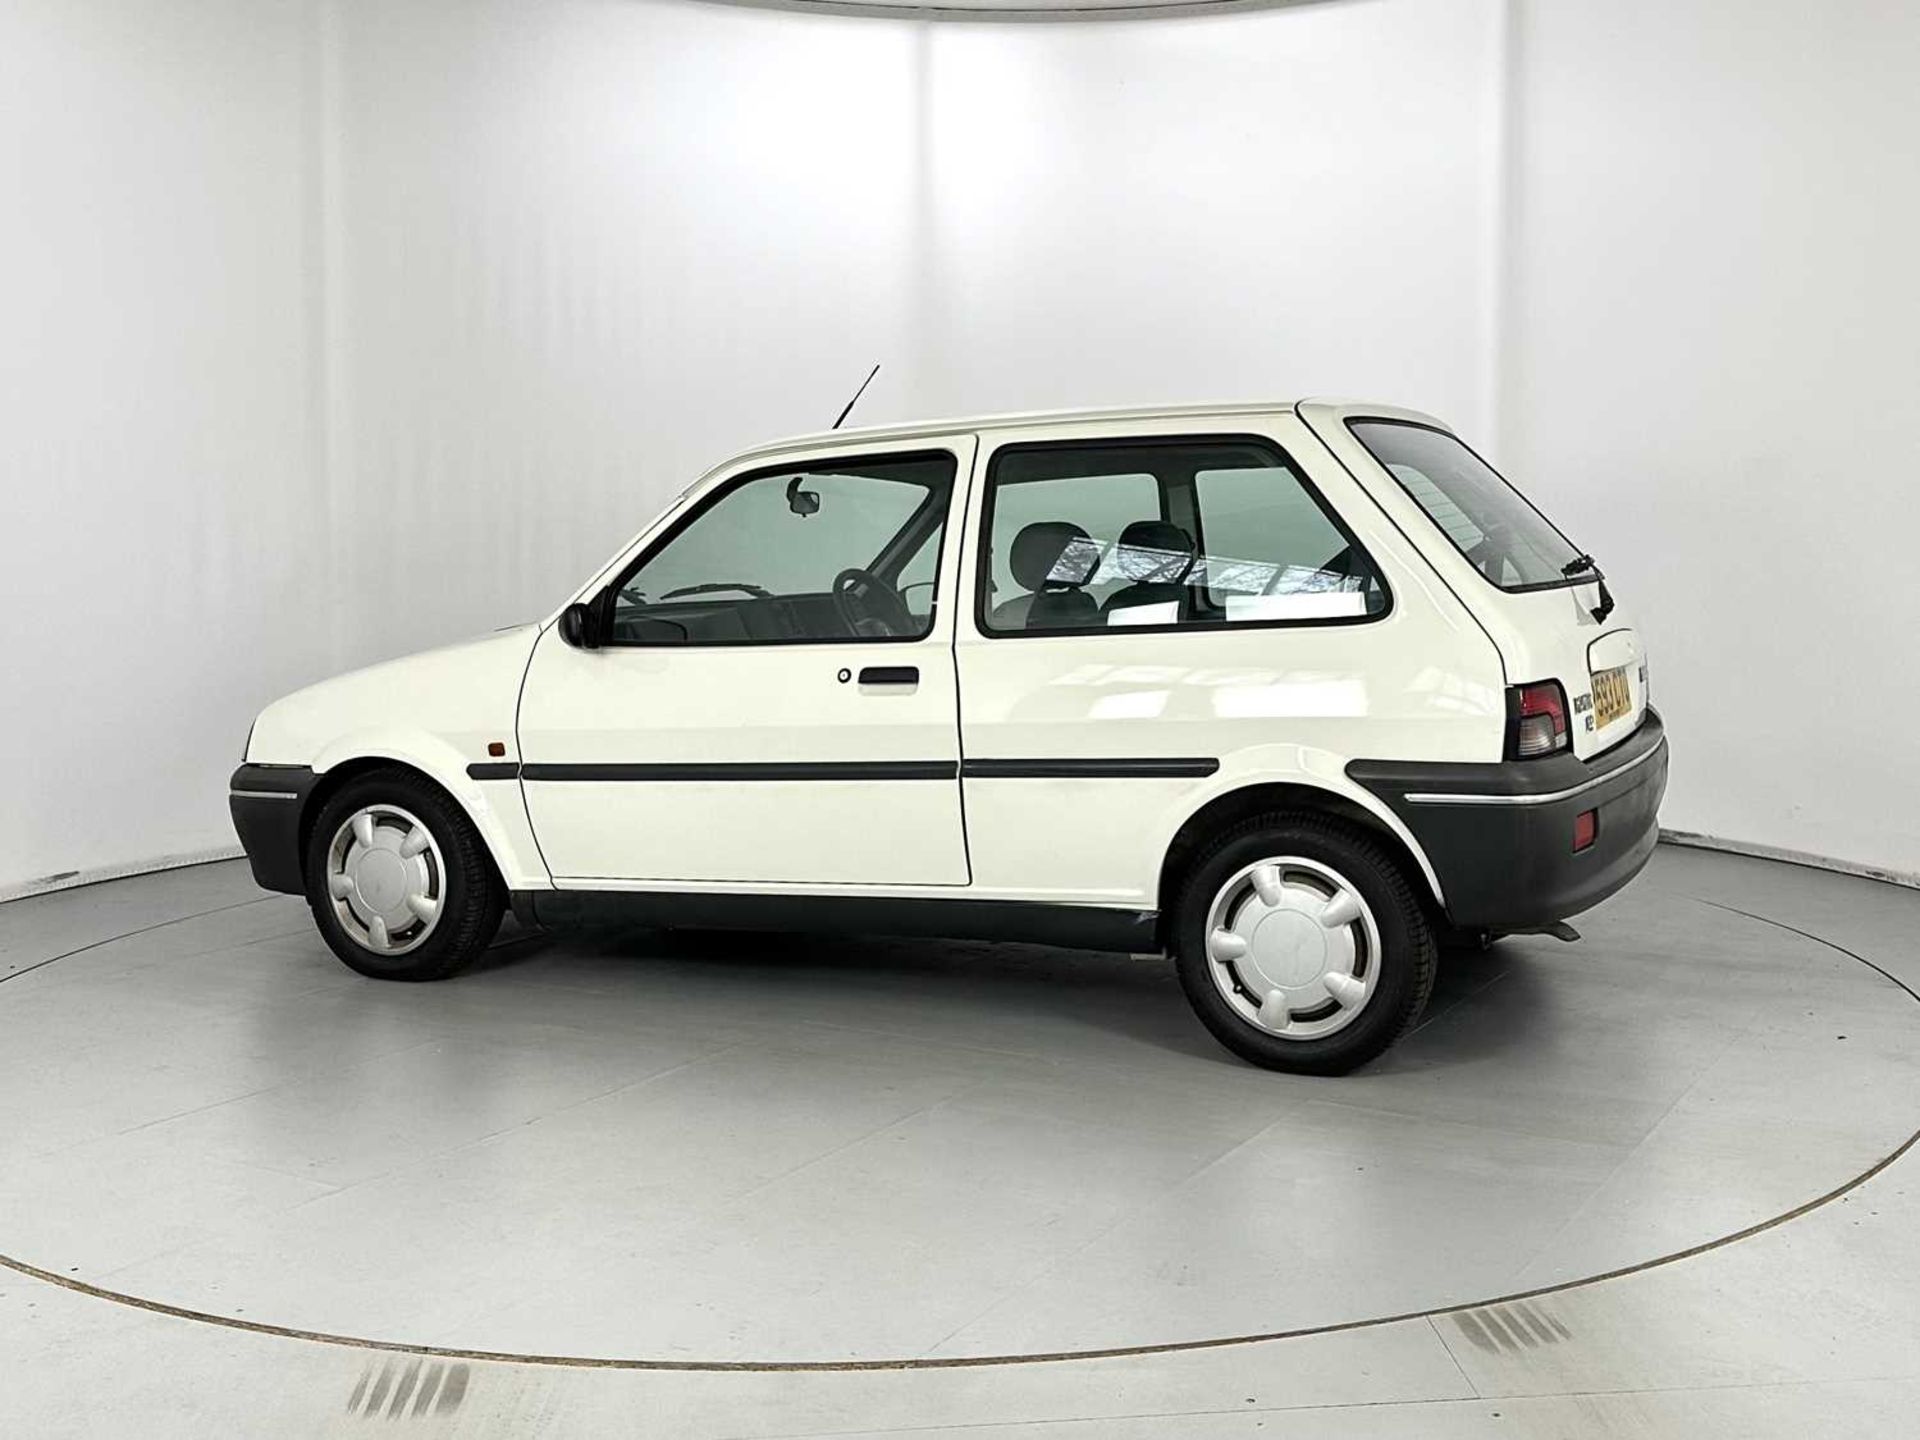 1996 Rover Metro - NO RESERVE 13,000 miles! - Image 6 of 29